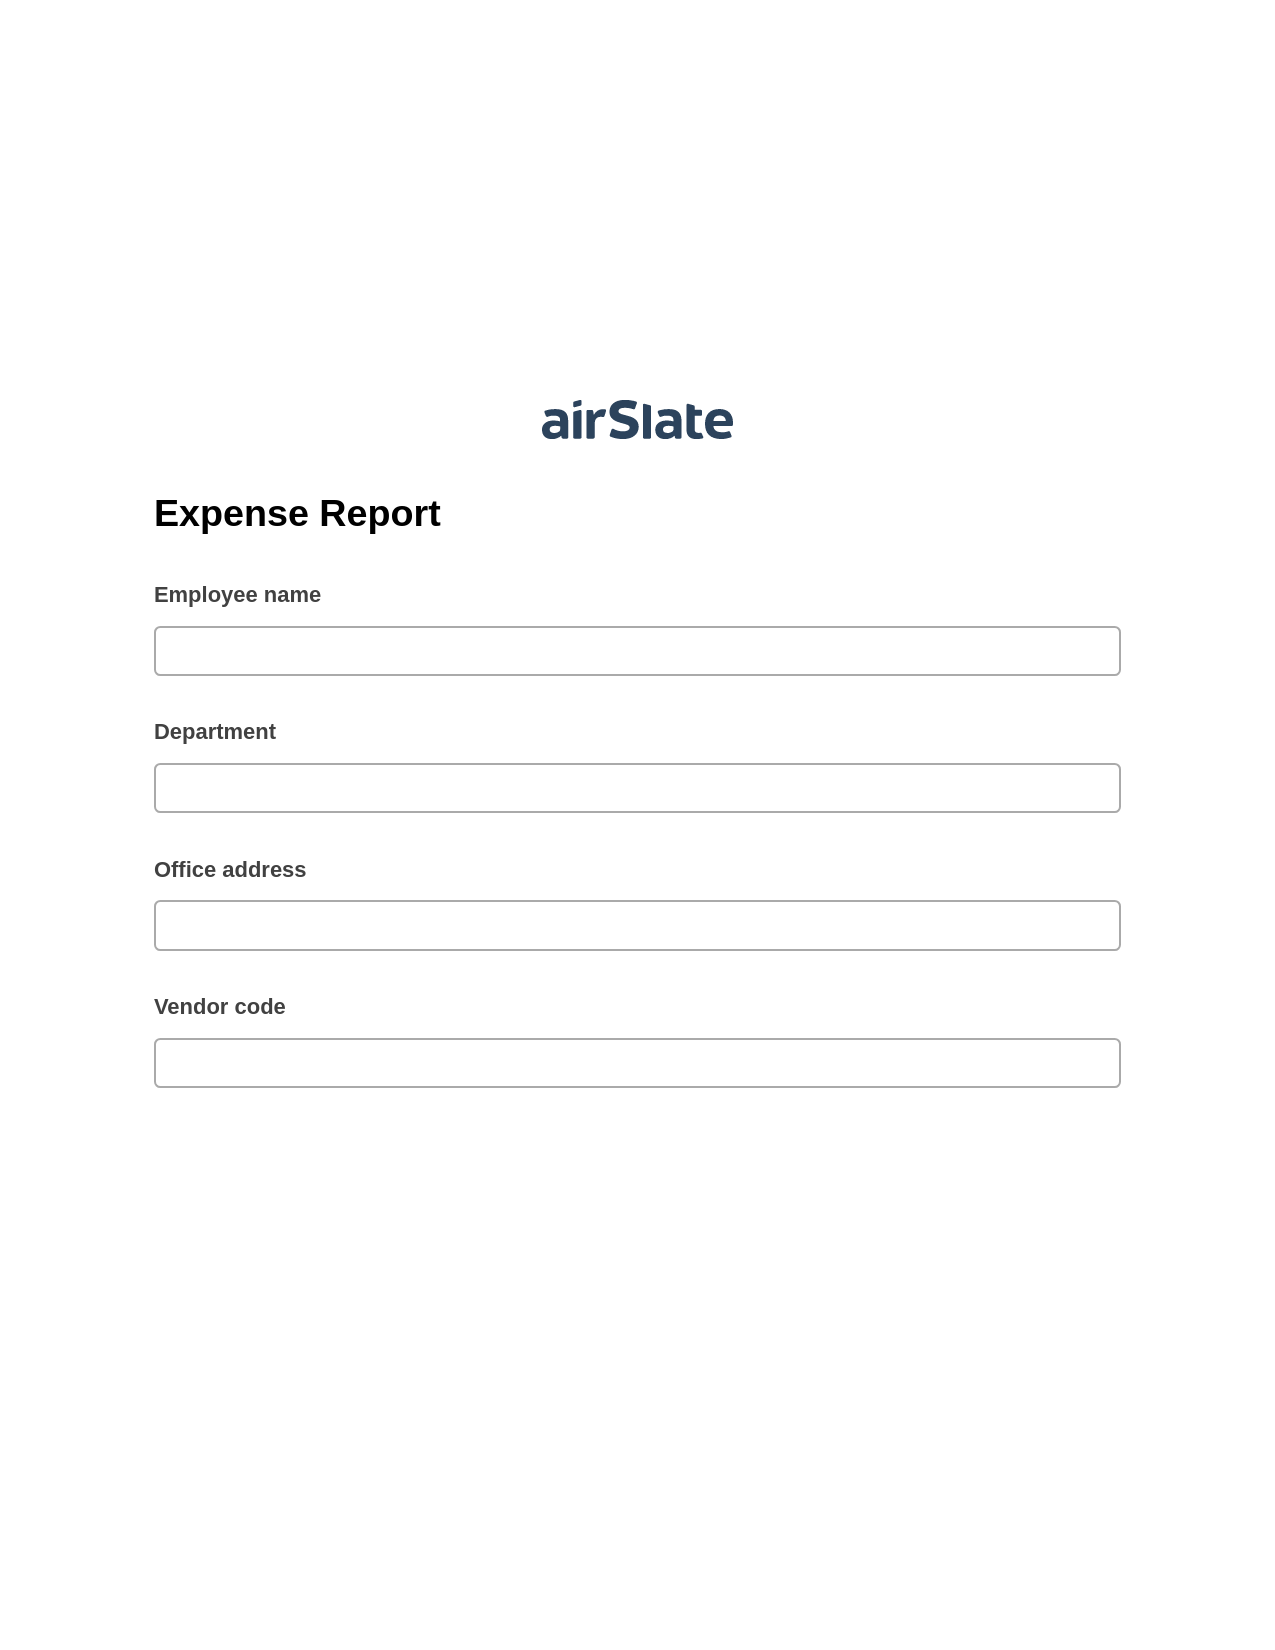 Expense Report Pre-fill Slate from MS Dynamics 365 Records Bot, Export to MS Dynamics 365 Bot, OneDrive Bot